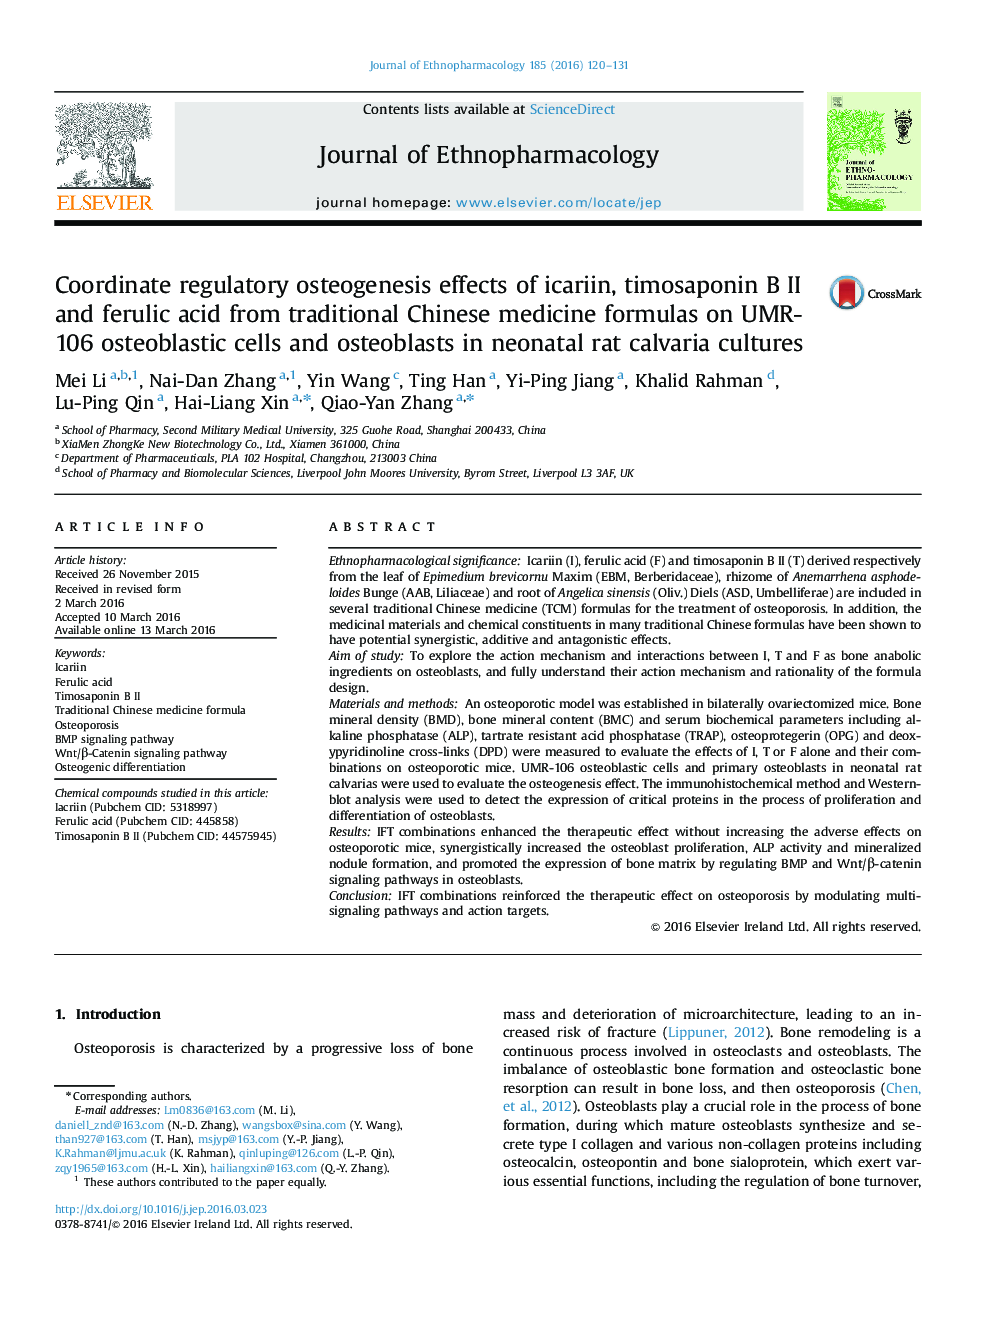 Coordinate regulatory osteogenesis effects of icariin, timosaponin B II and ferulic acid from traditional Chinese medicine formulas on UMR-106 osteoblastic cells and osteoblasts in neonatal rat calvaria cultures